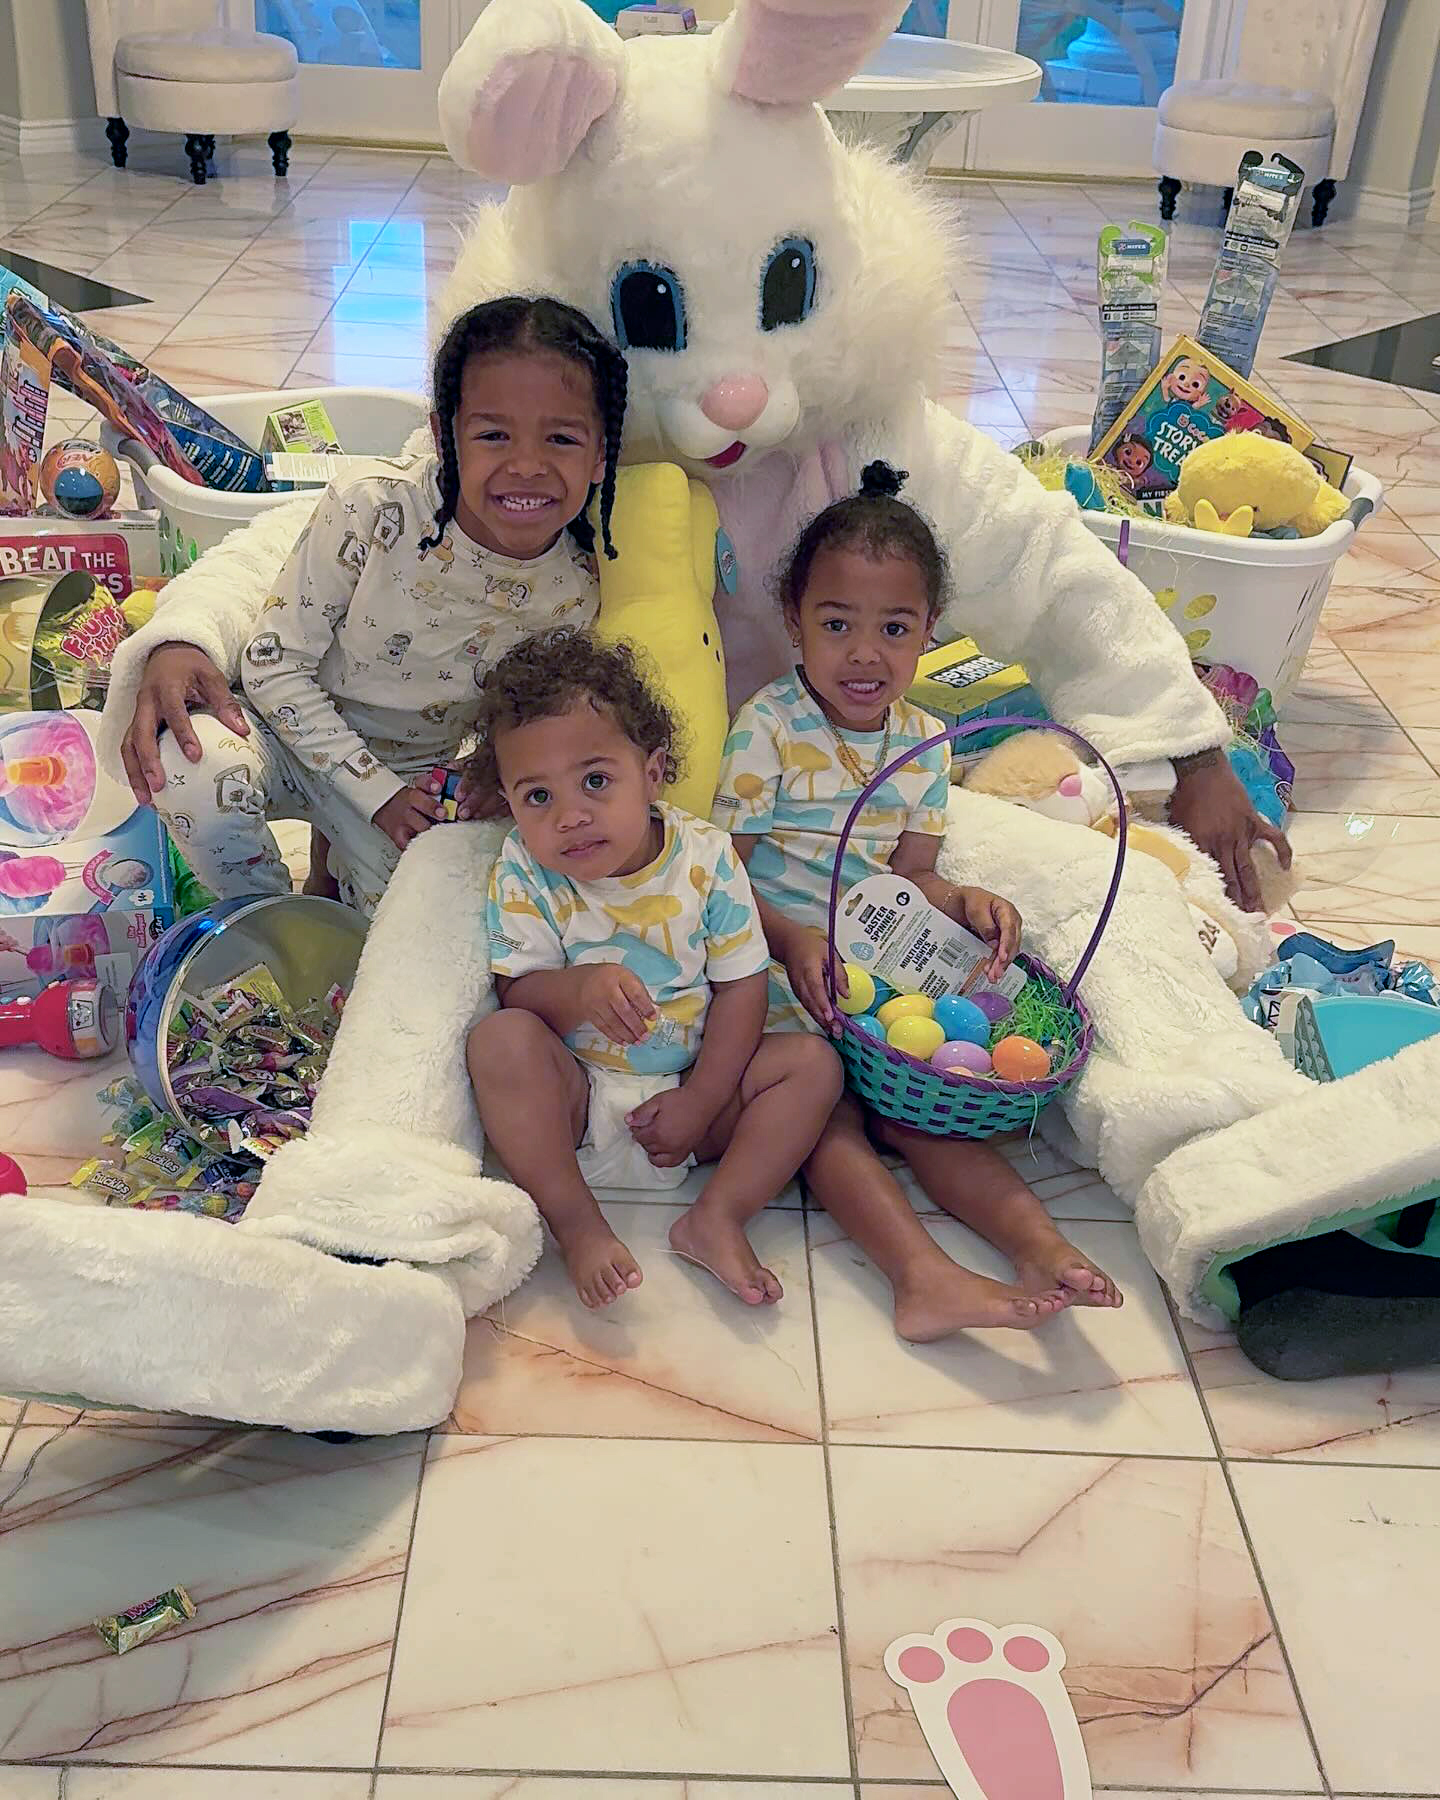 Nick Cannon dressed as an Easter Bunny with the three children he shares with Brittany Bell, Golden, Powerful, and Rise